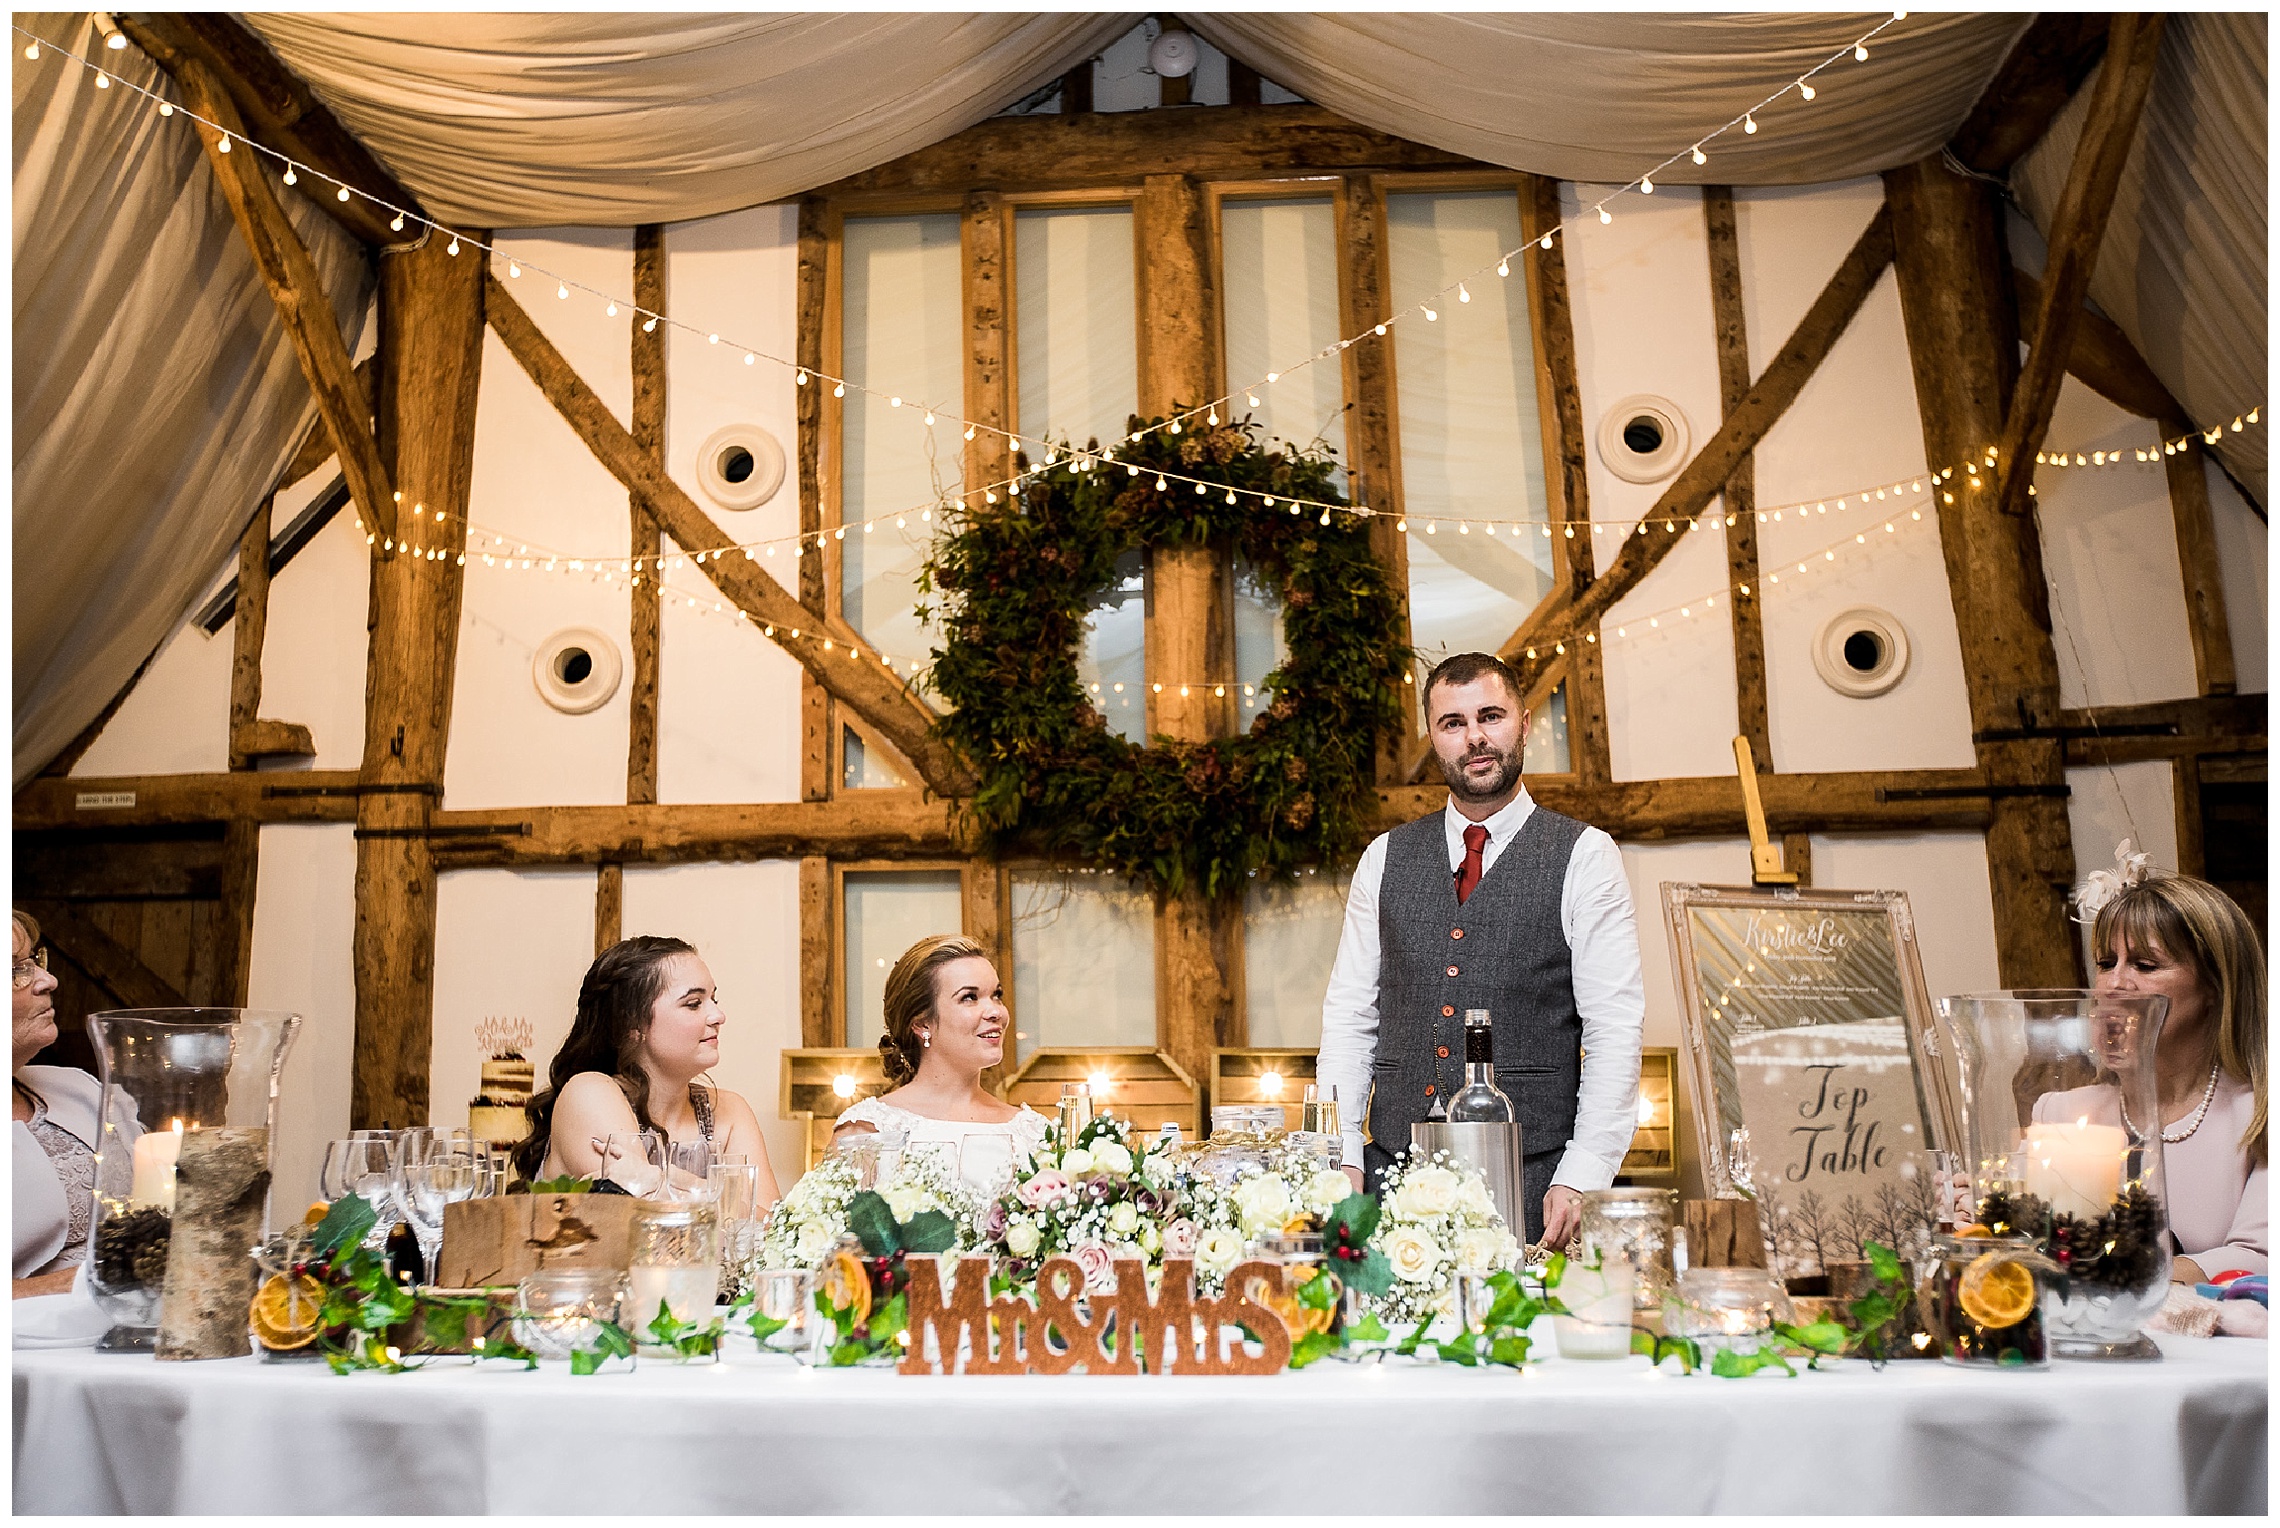 Groom gives speech from top table in barn venue